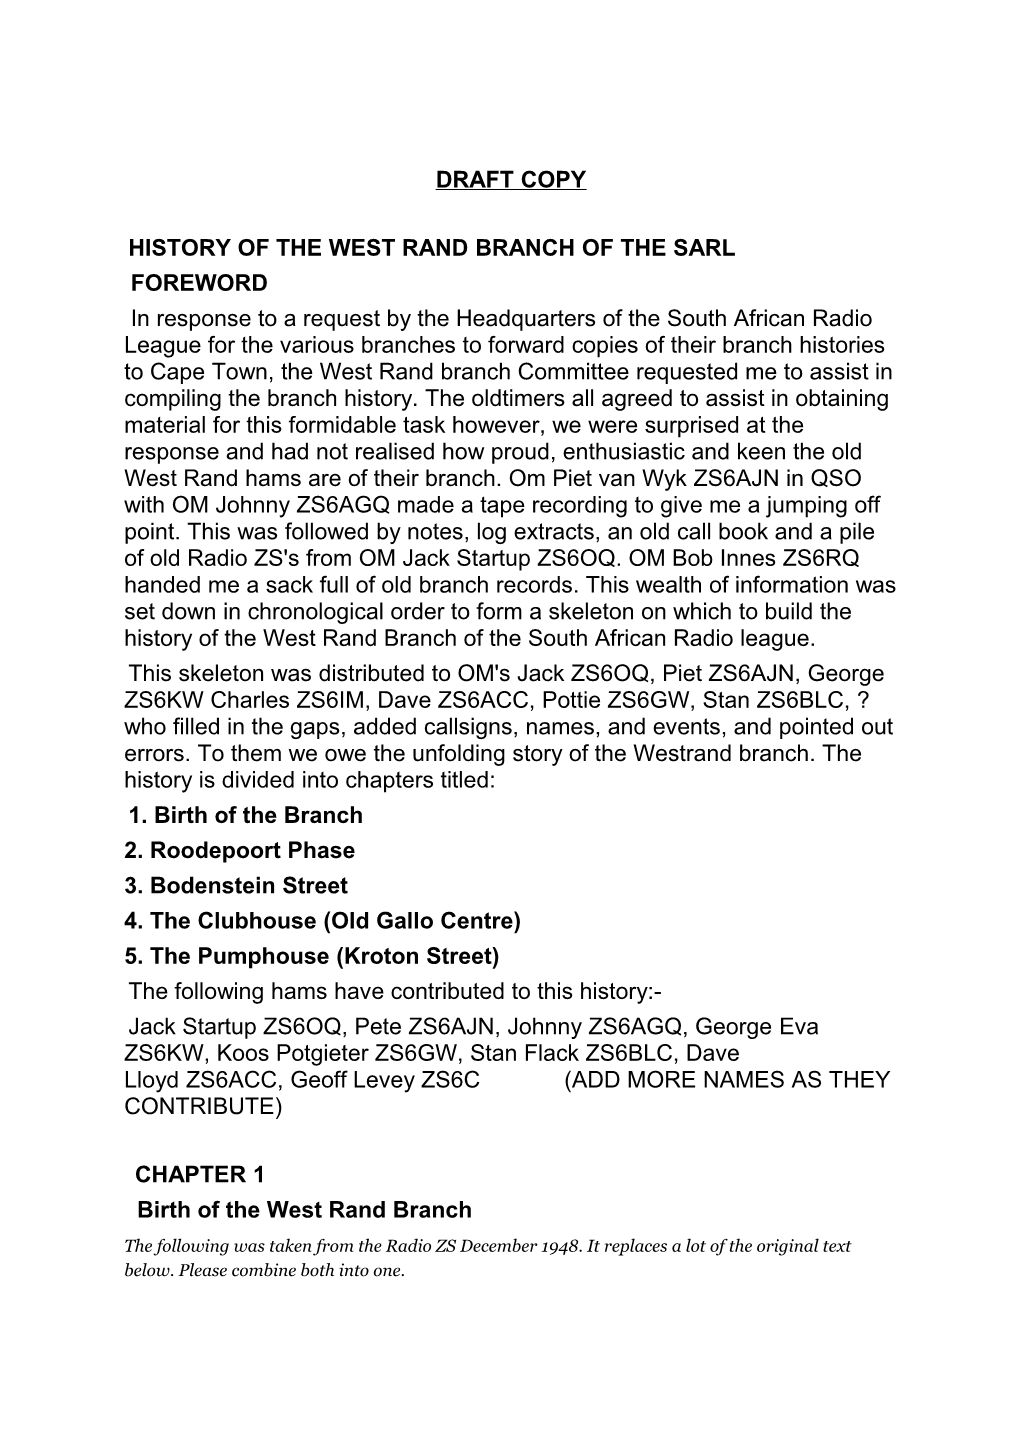 History of the West Rand Branch of the Sarl